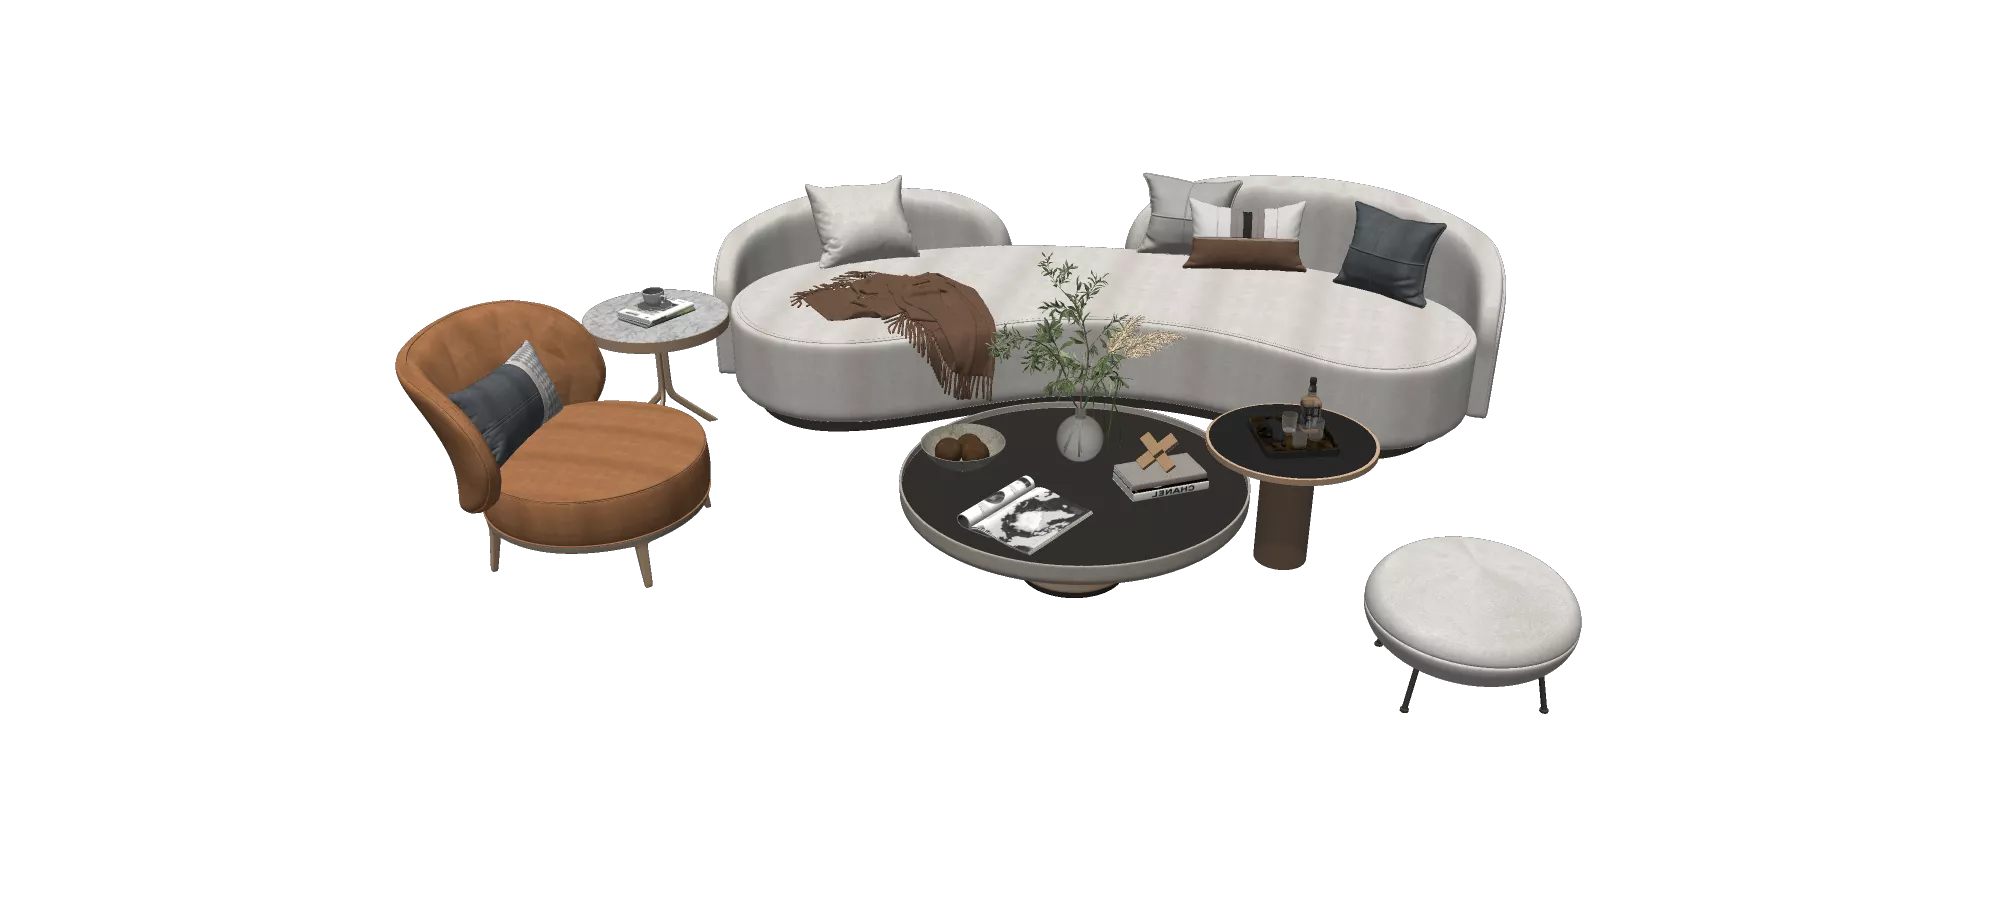 MODERN SOFA - SKETCHUP 3D MODEL - VRAY OR ENSCAPE - ID13057